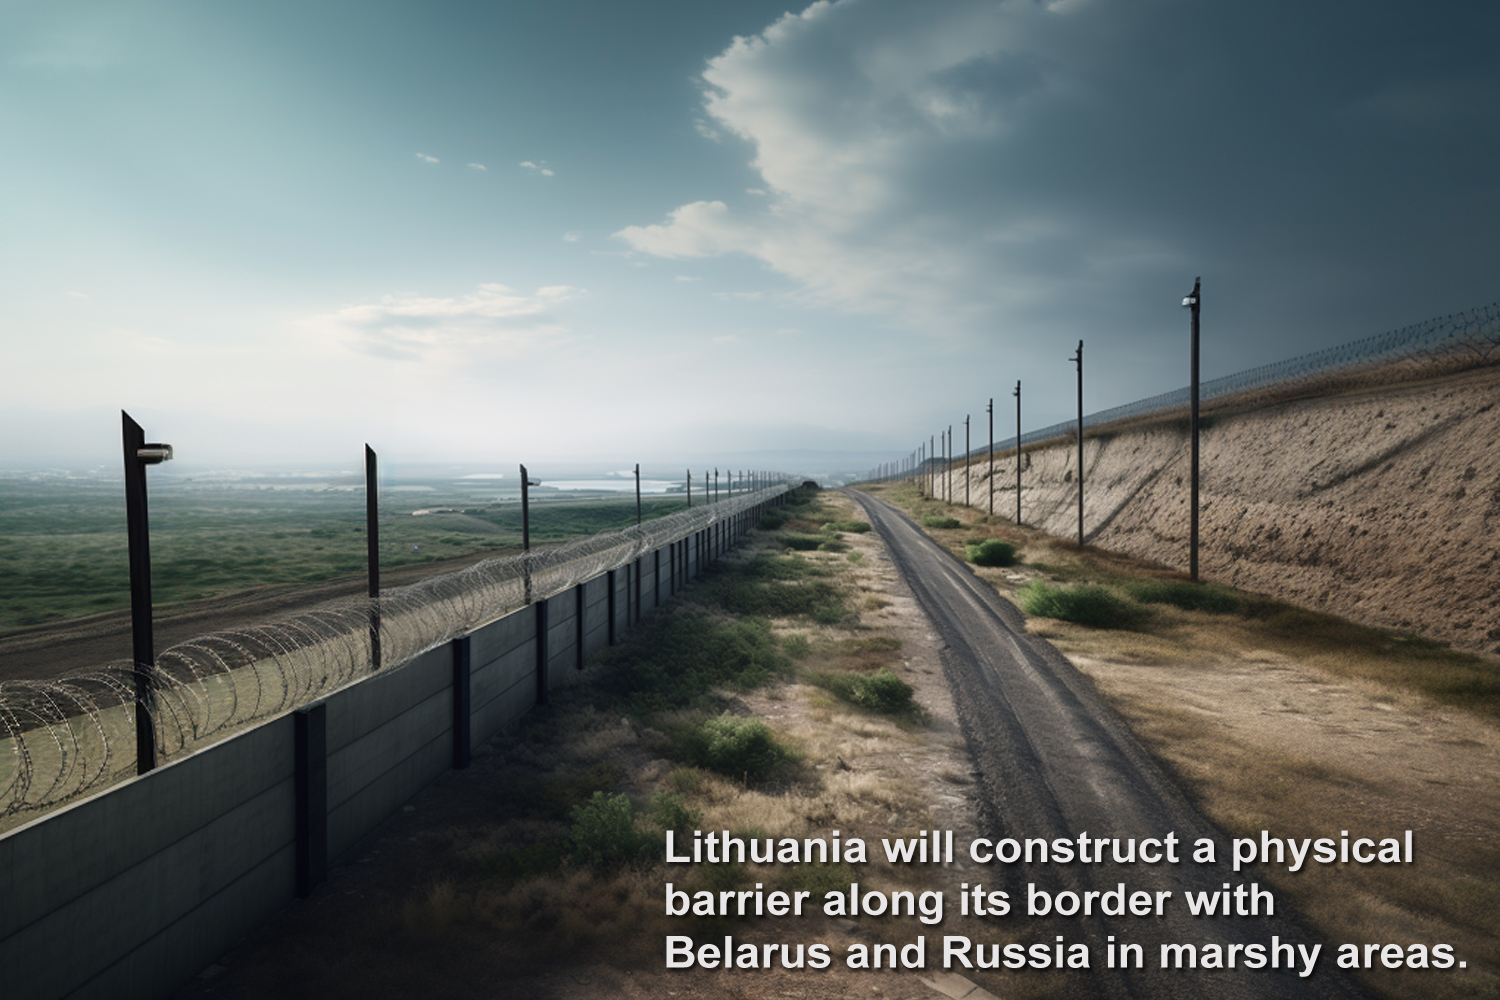 Lithuania will construct a physical barrier along its border with Belarus and Russia in marshy areas.